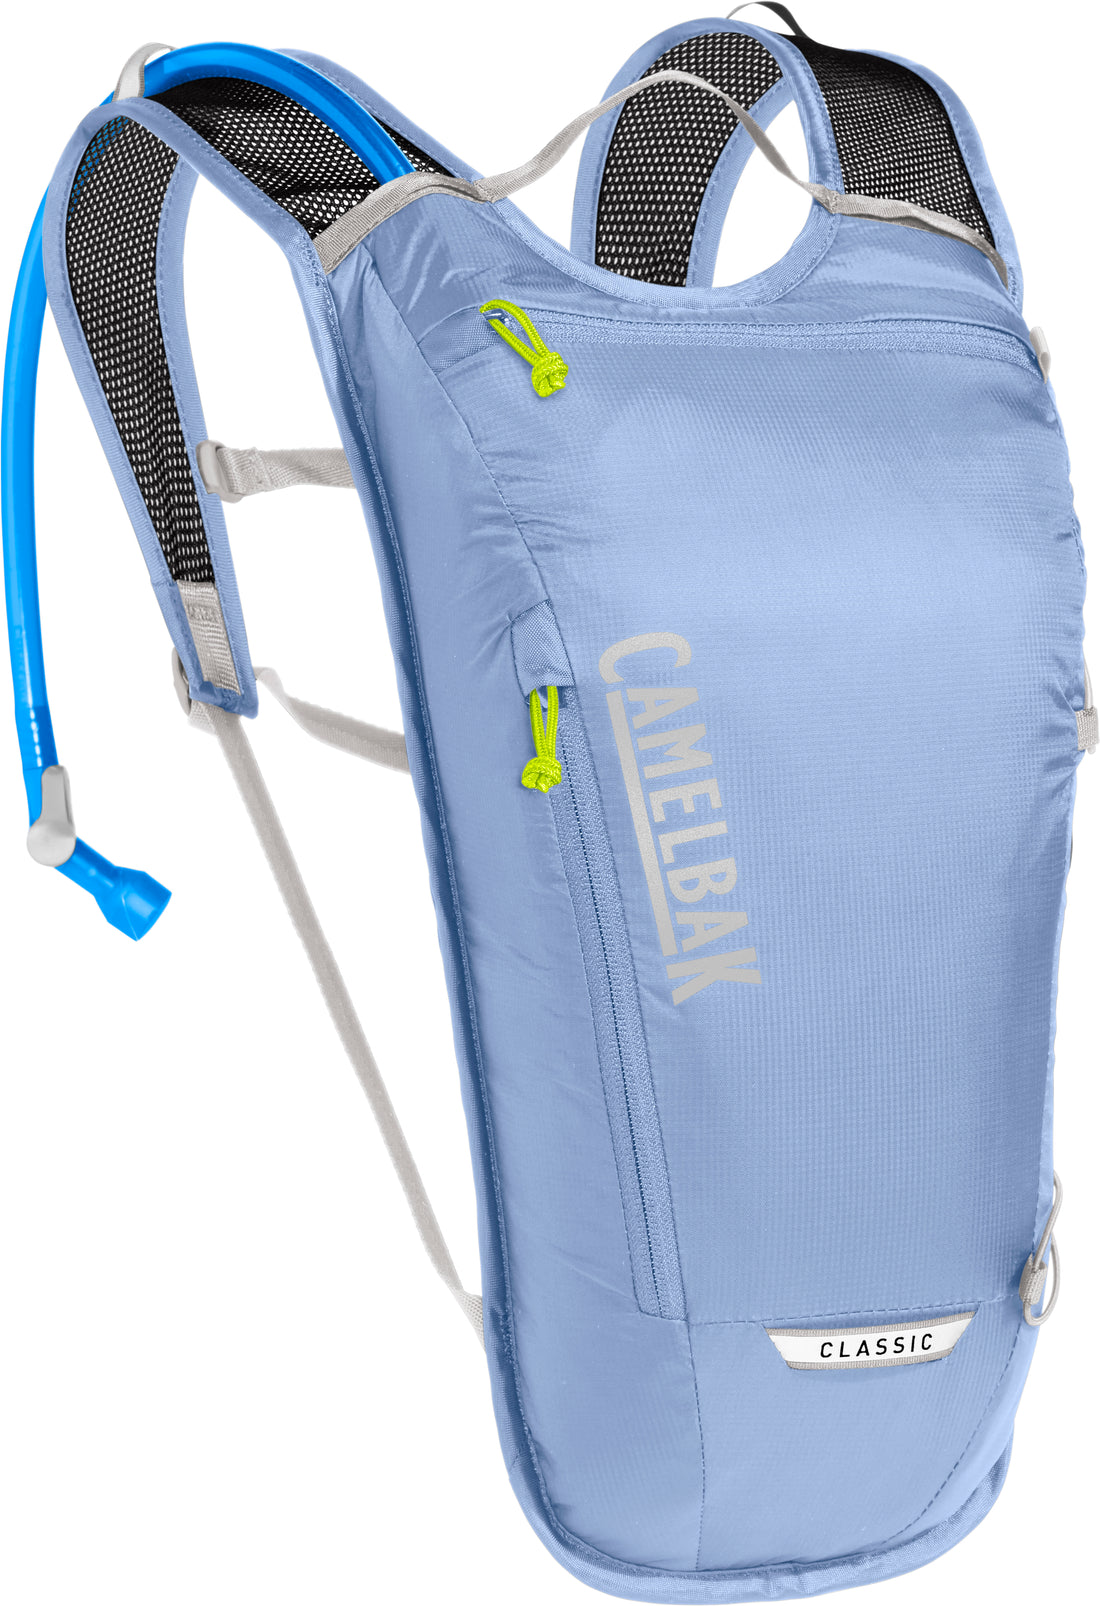 Camelbak|Classic™_Light|Cycle_LM